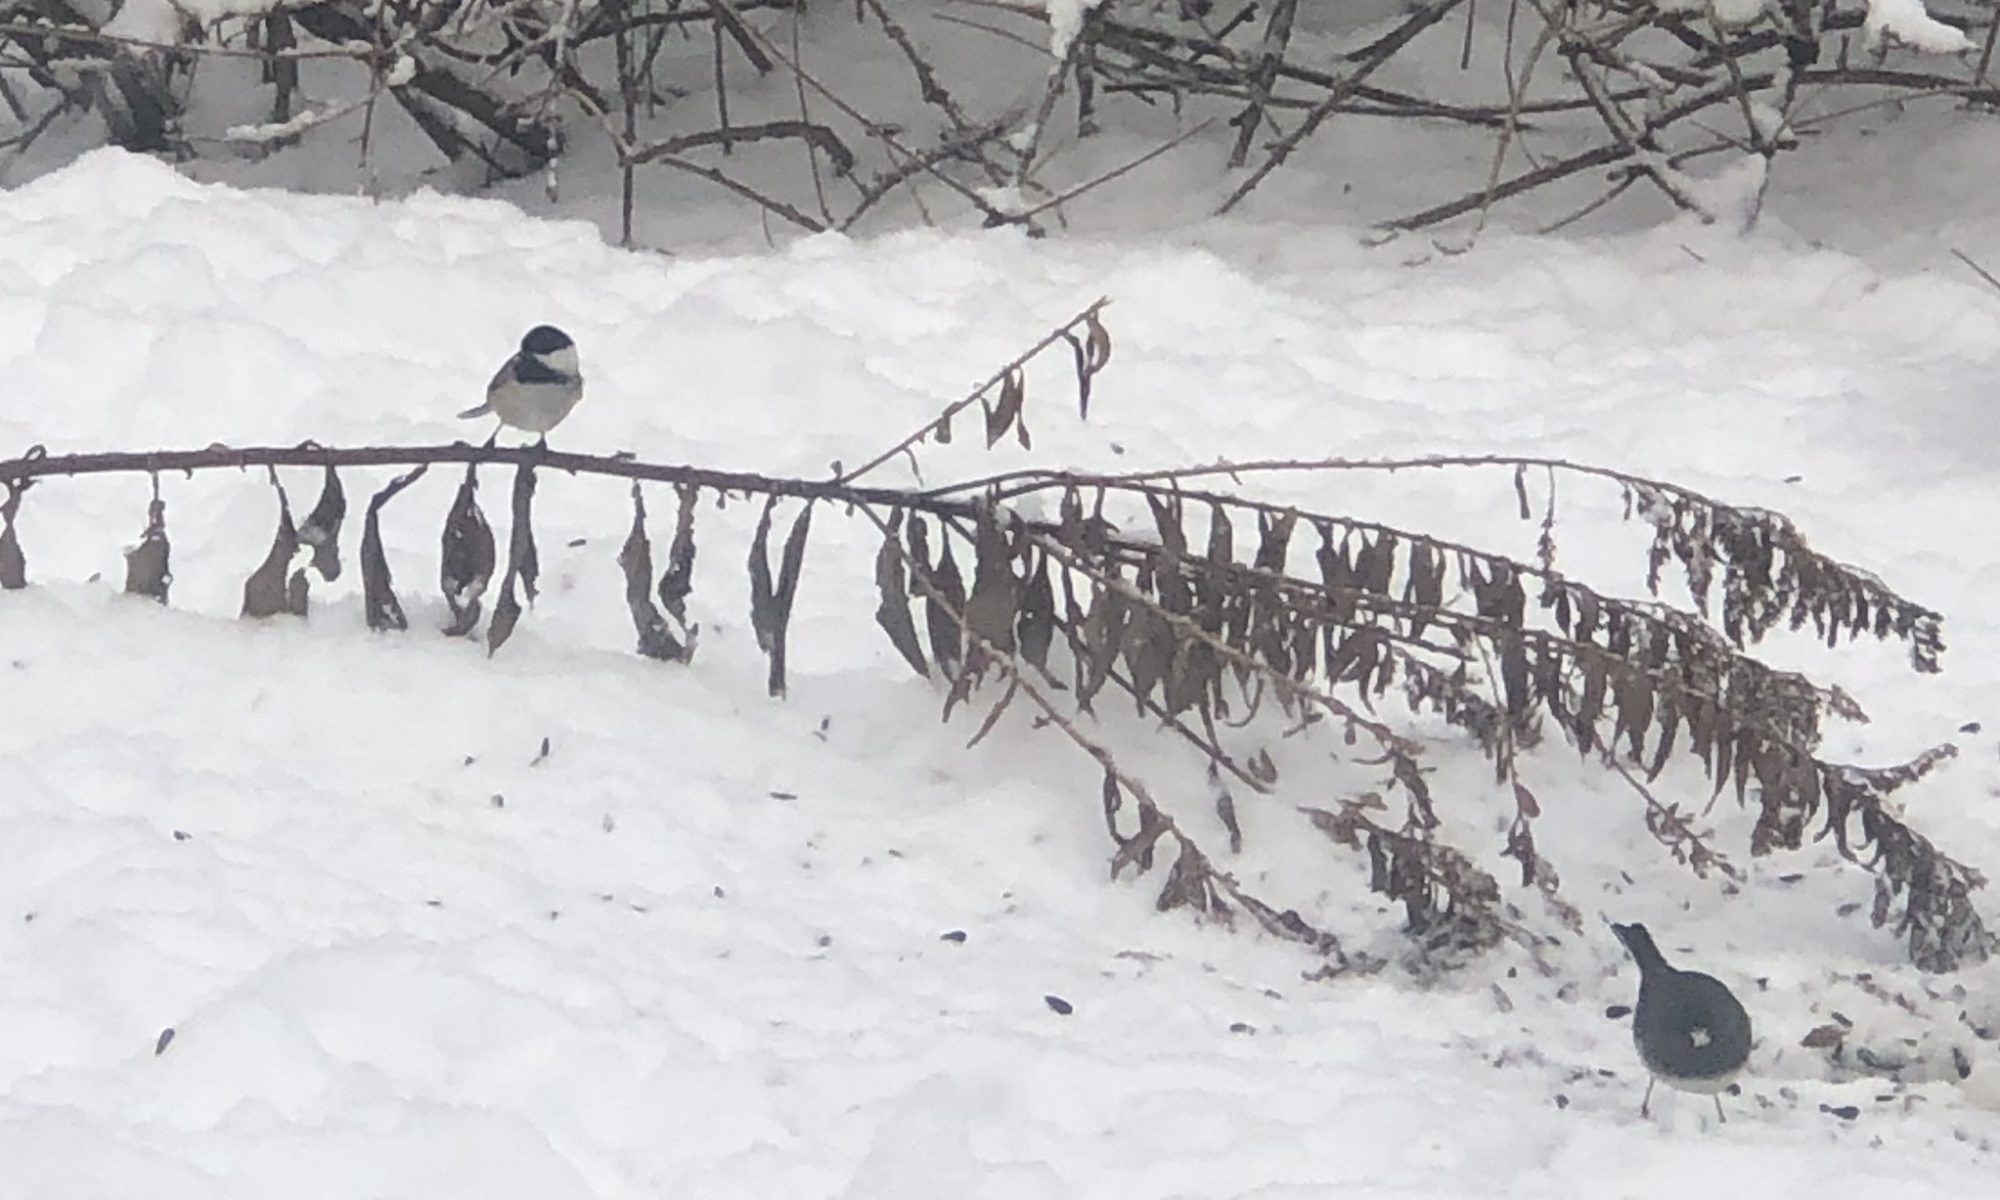 Black-capped Chickadee and Dark-eyed Junco in winter. The Chickadee is perched on a half-fallen dried goldenrod stem on the left; the Junco is underneath he stem on the right. There are some forsythia stems in the background and snow covers the ground. Digiscoped iPhone photo by K. Talmage and used by permission.